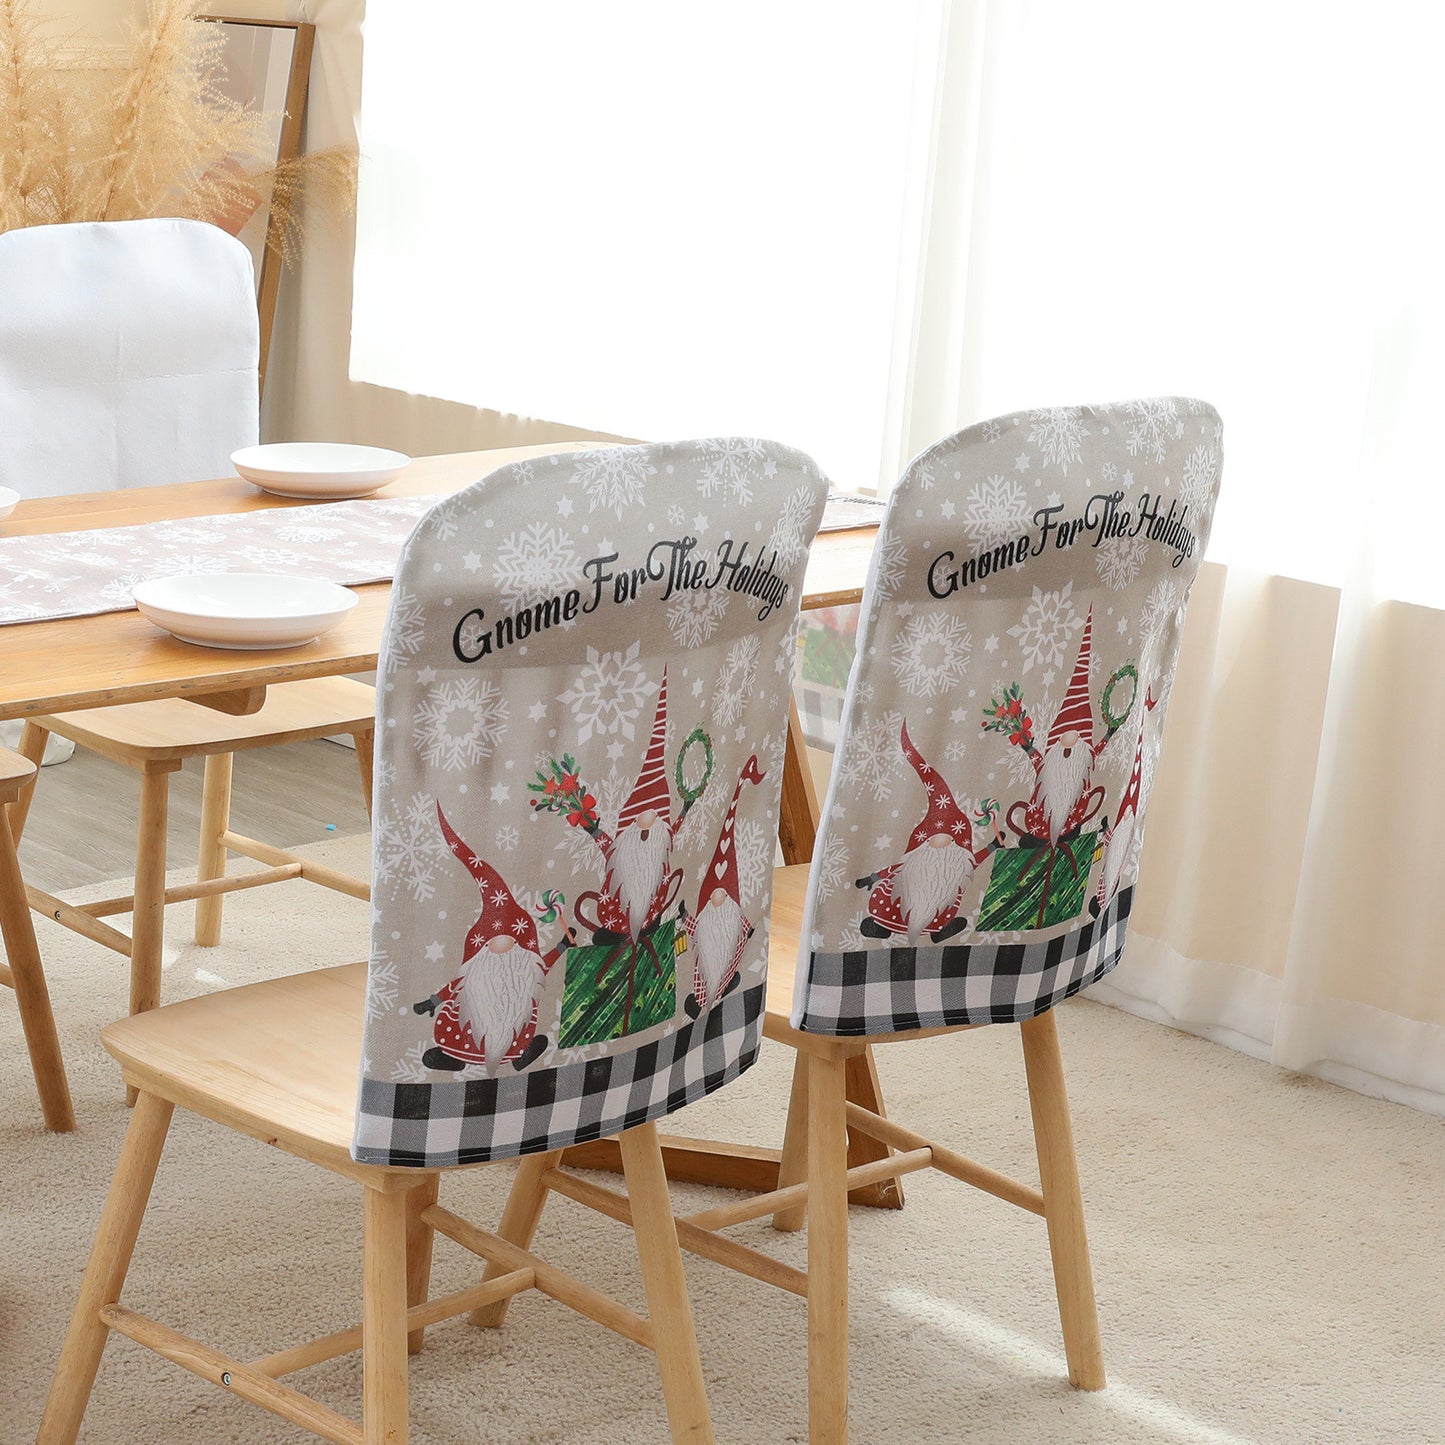 Rudolph Decorative Chair Cover Decoration Scene Layout Props Atmosphere Decoration